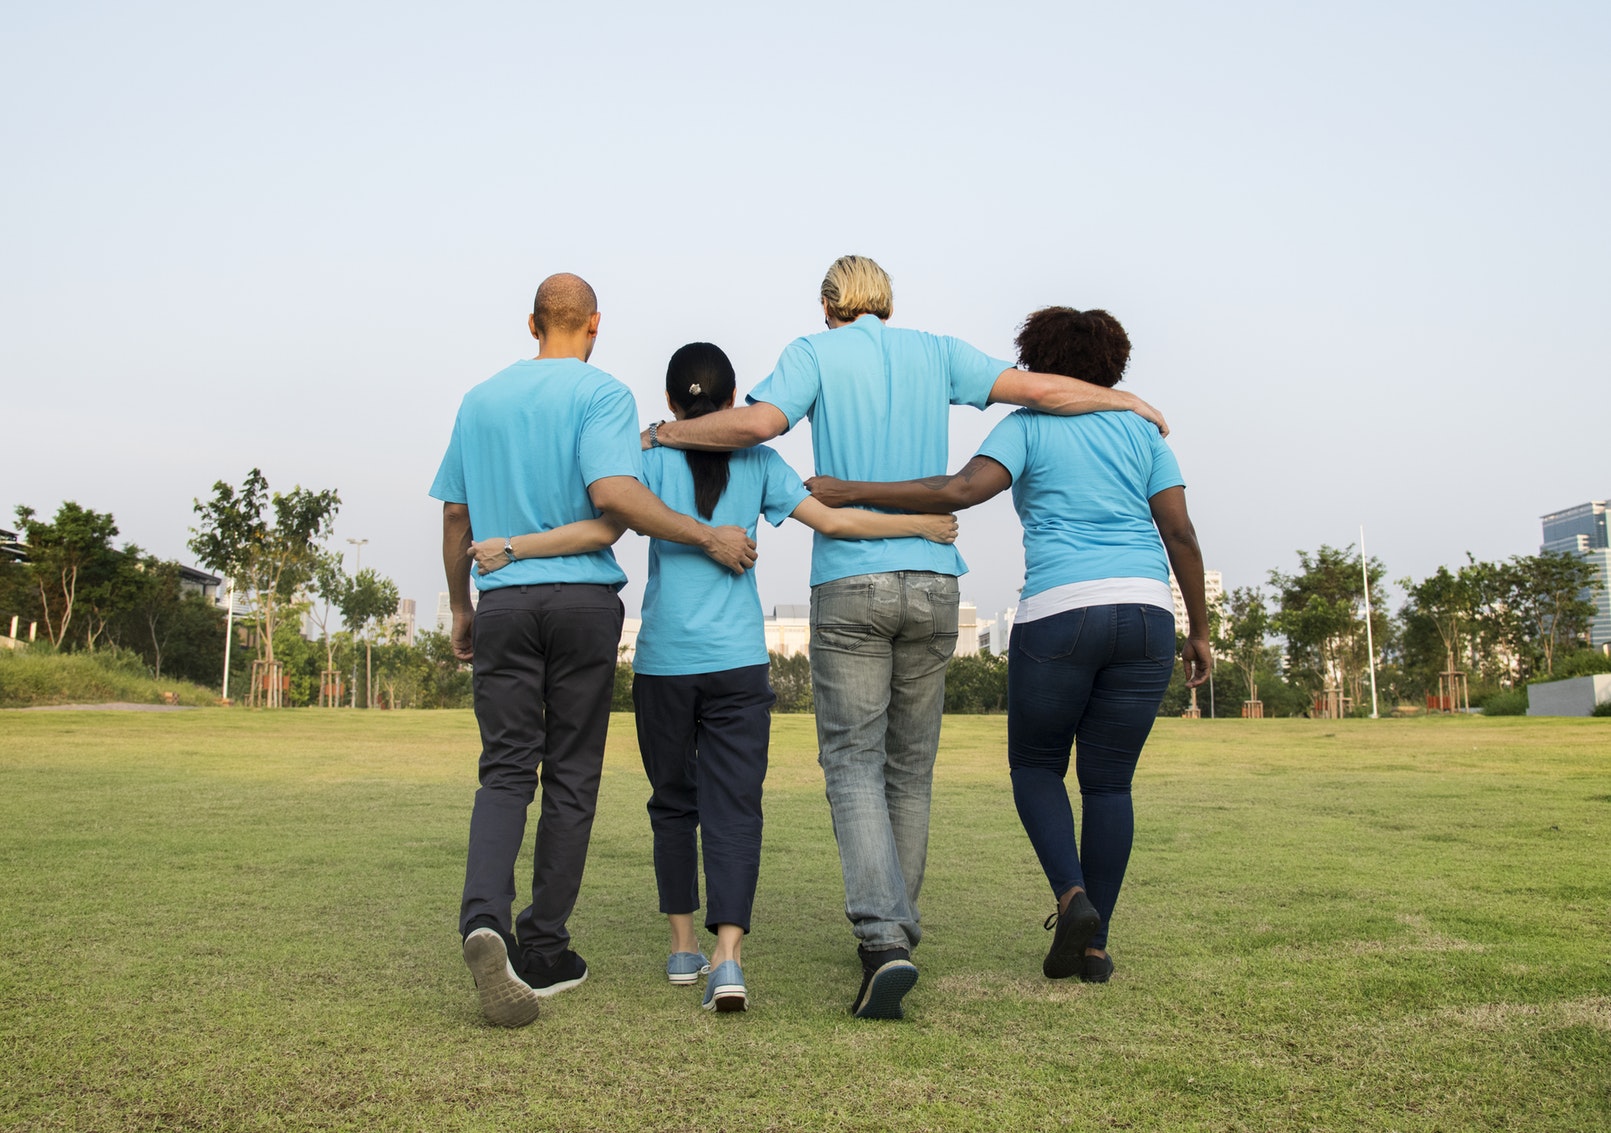 Four adults walking through the grass away from the camera with their hands around each others backs showing community. They are all wearing bright blue/teal shirts with jeans.